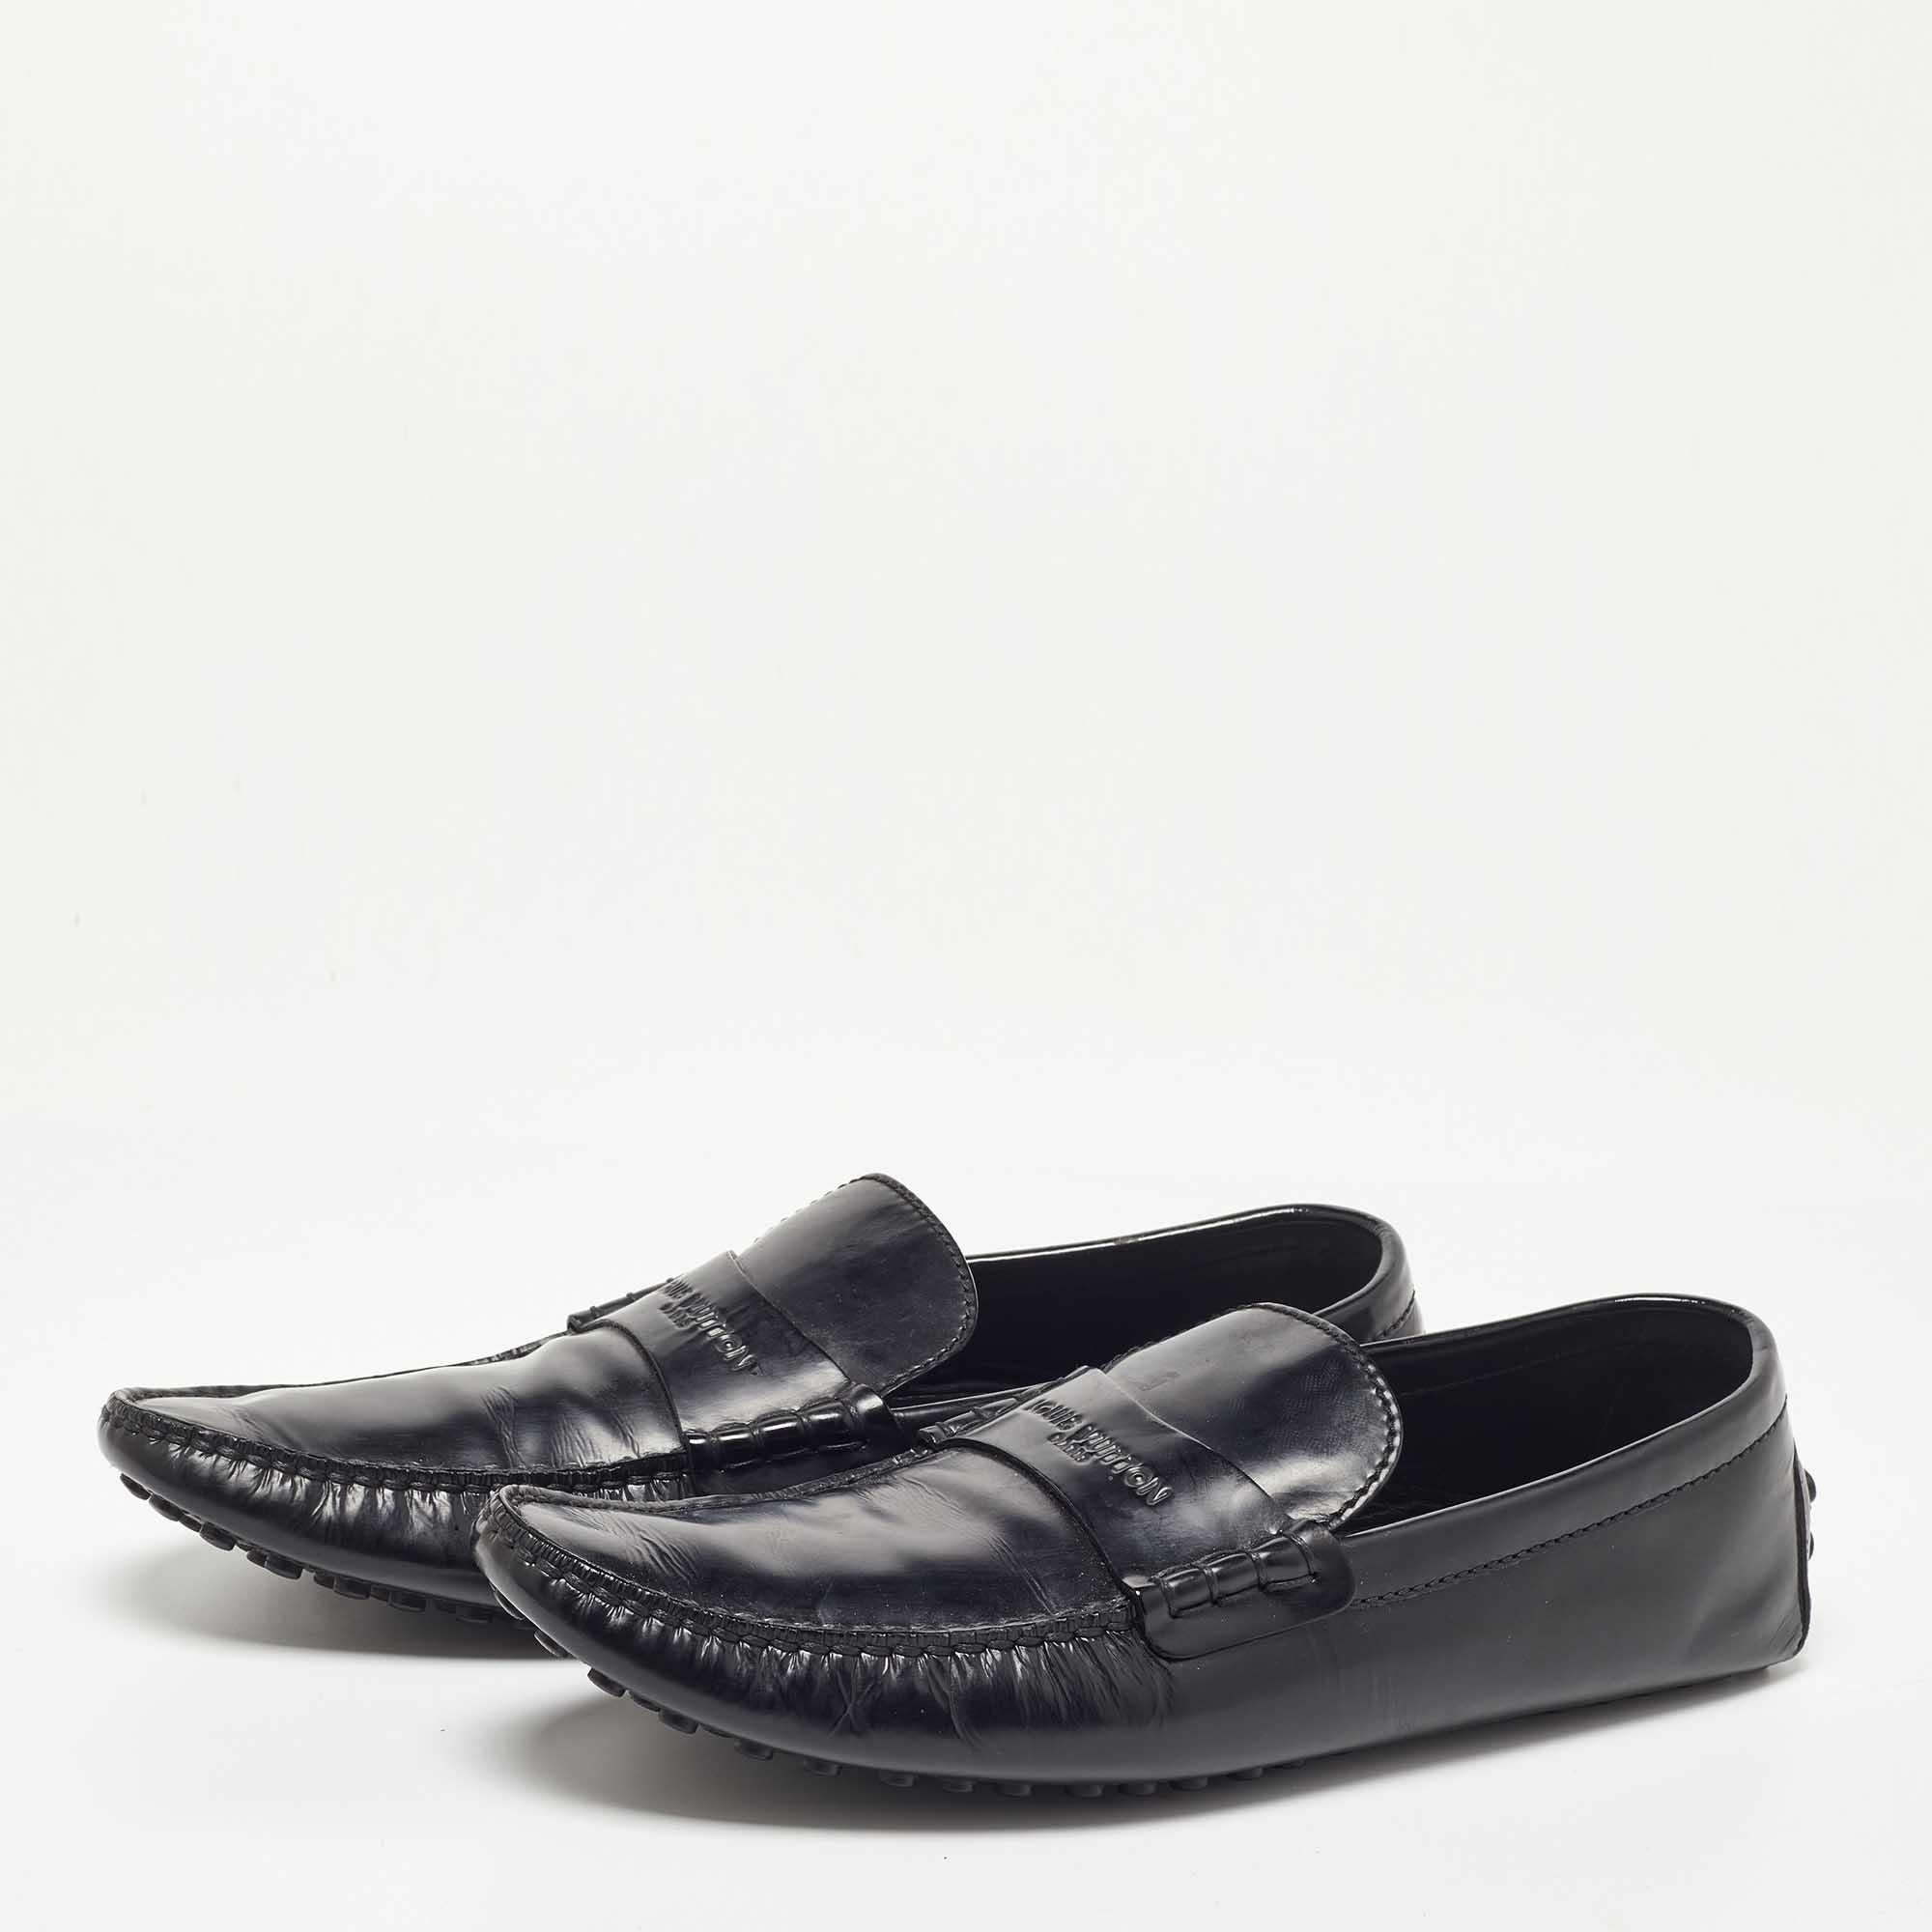 Practical, fashionable, and durable—these LV loafers are carefully built to be fine companions to your everyday style. They come made using the best materials to be a prized buy.

